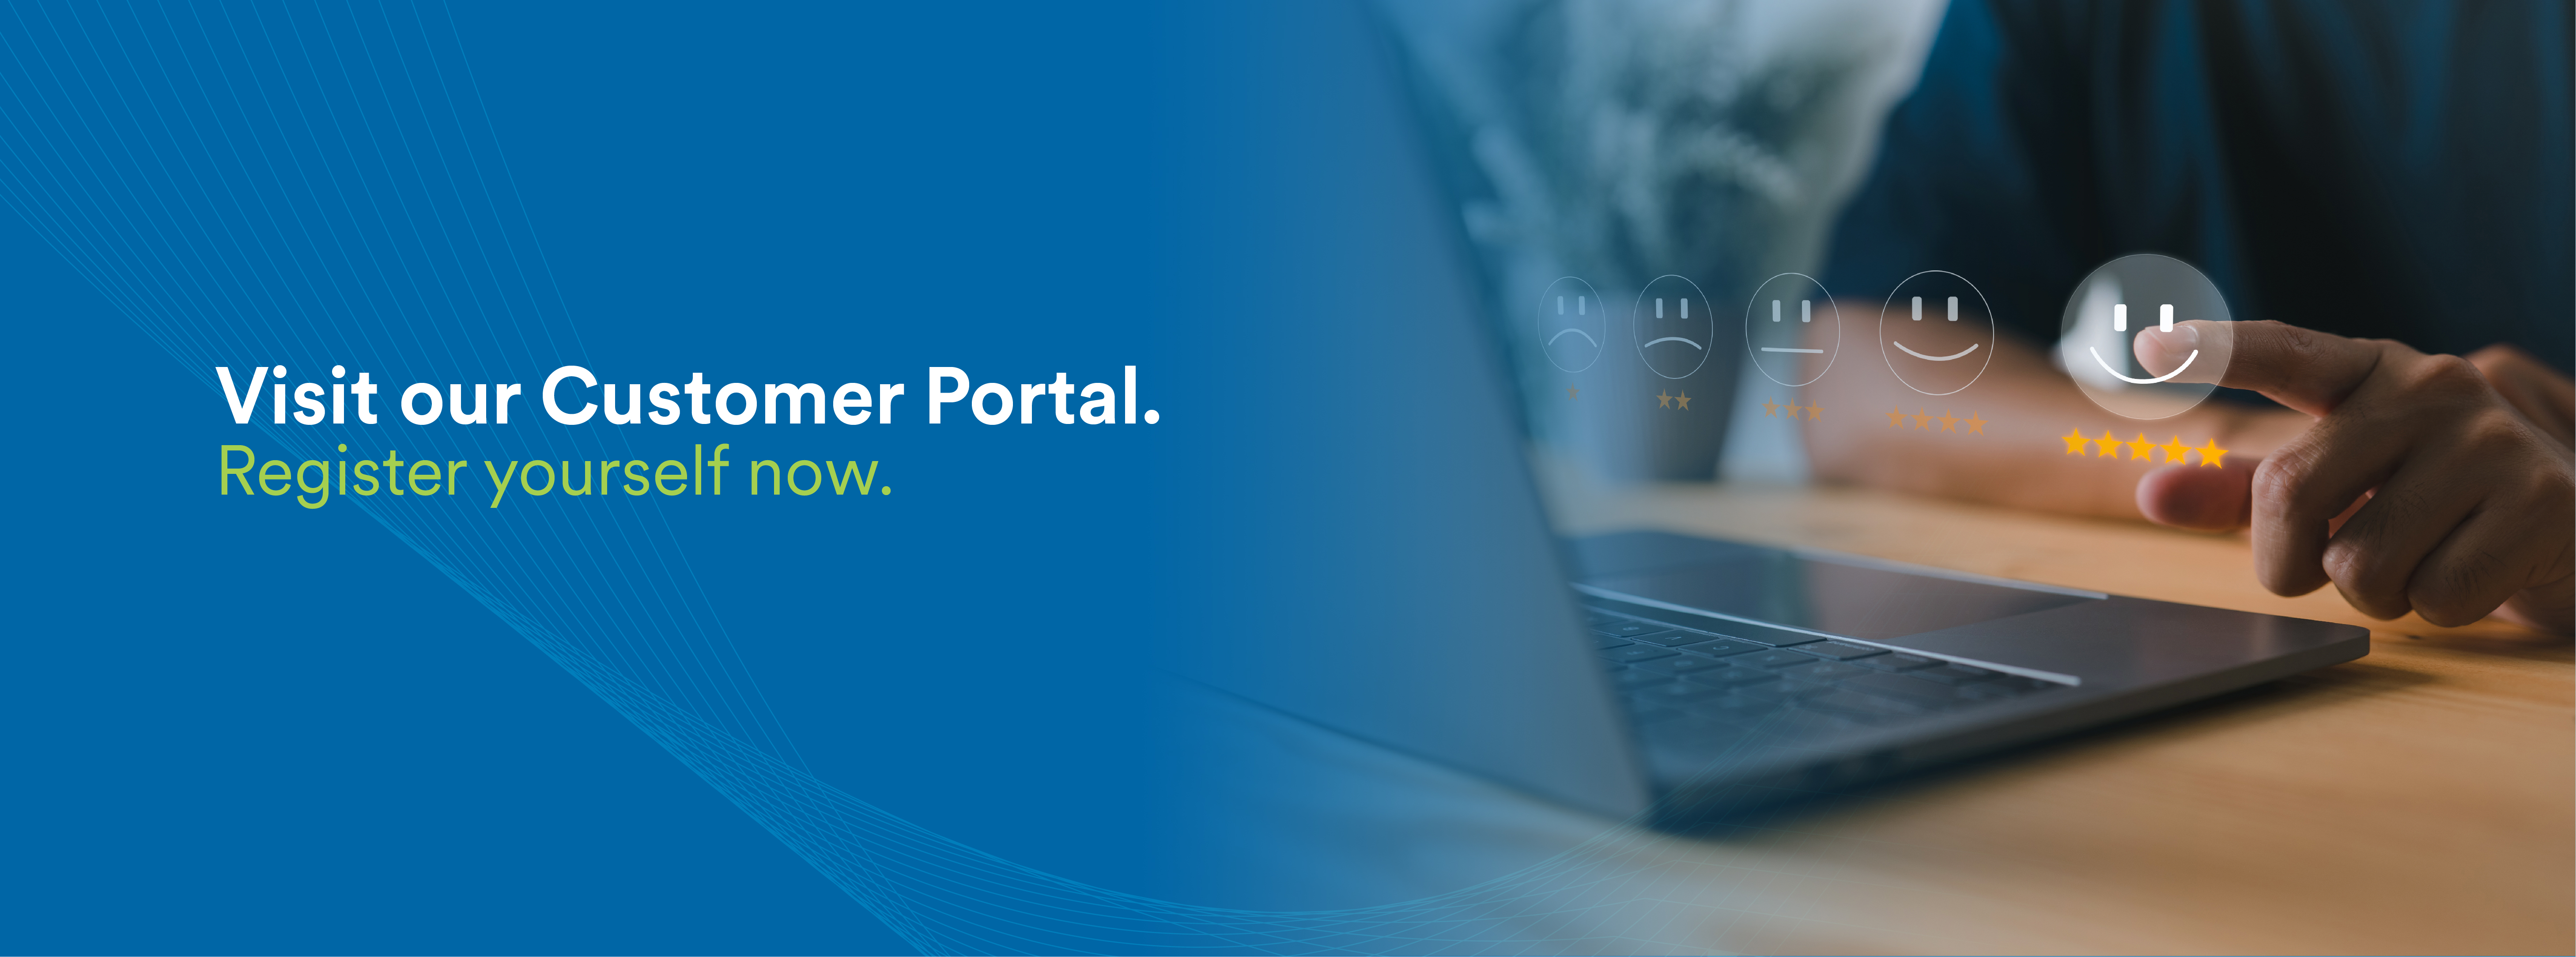 Visit our Customer Portal. Register yourself now. 